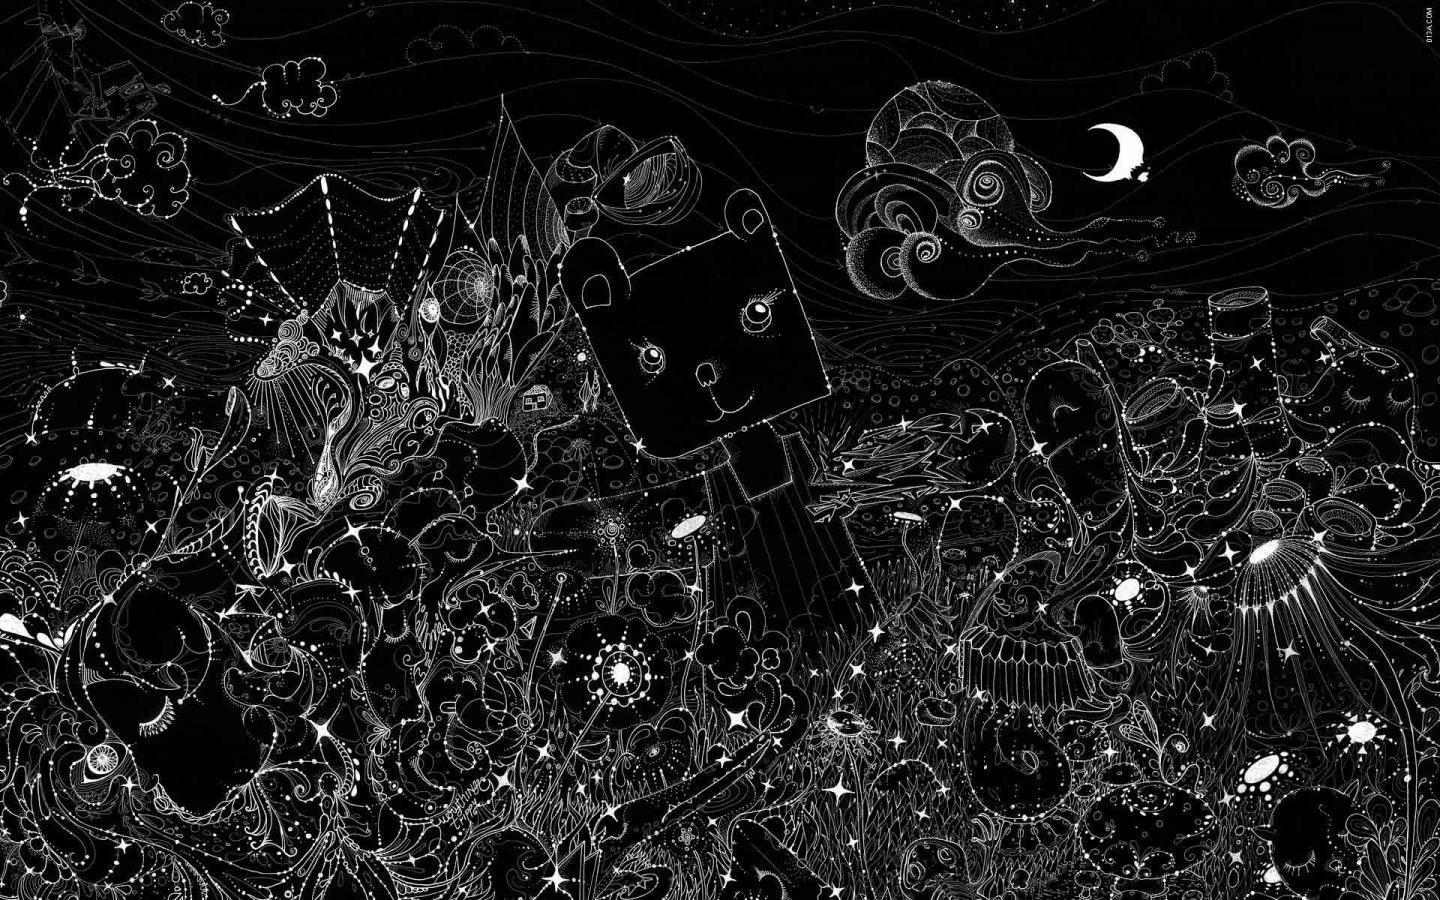 A black and white illustration of a robot surrounded by stars, planets, and other celestial objects. - 1440x900